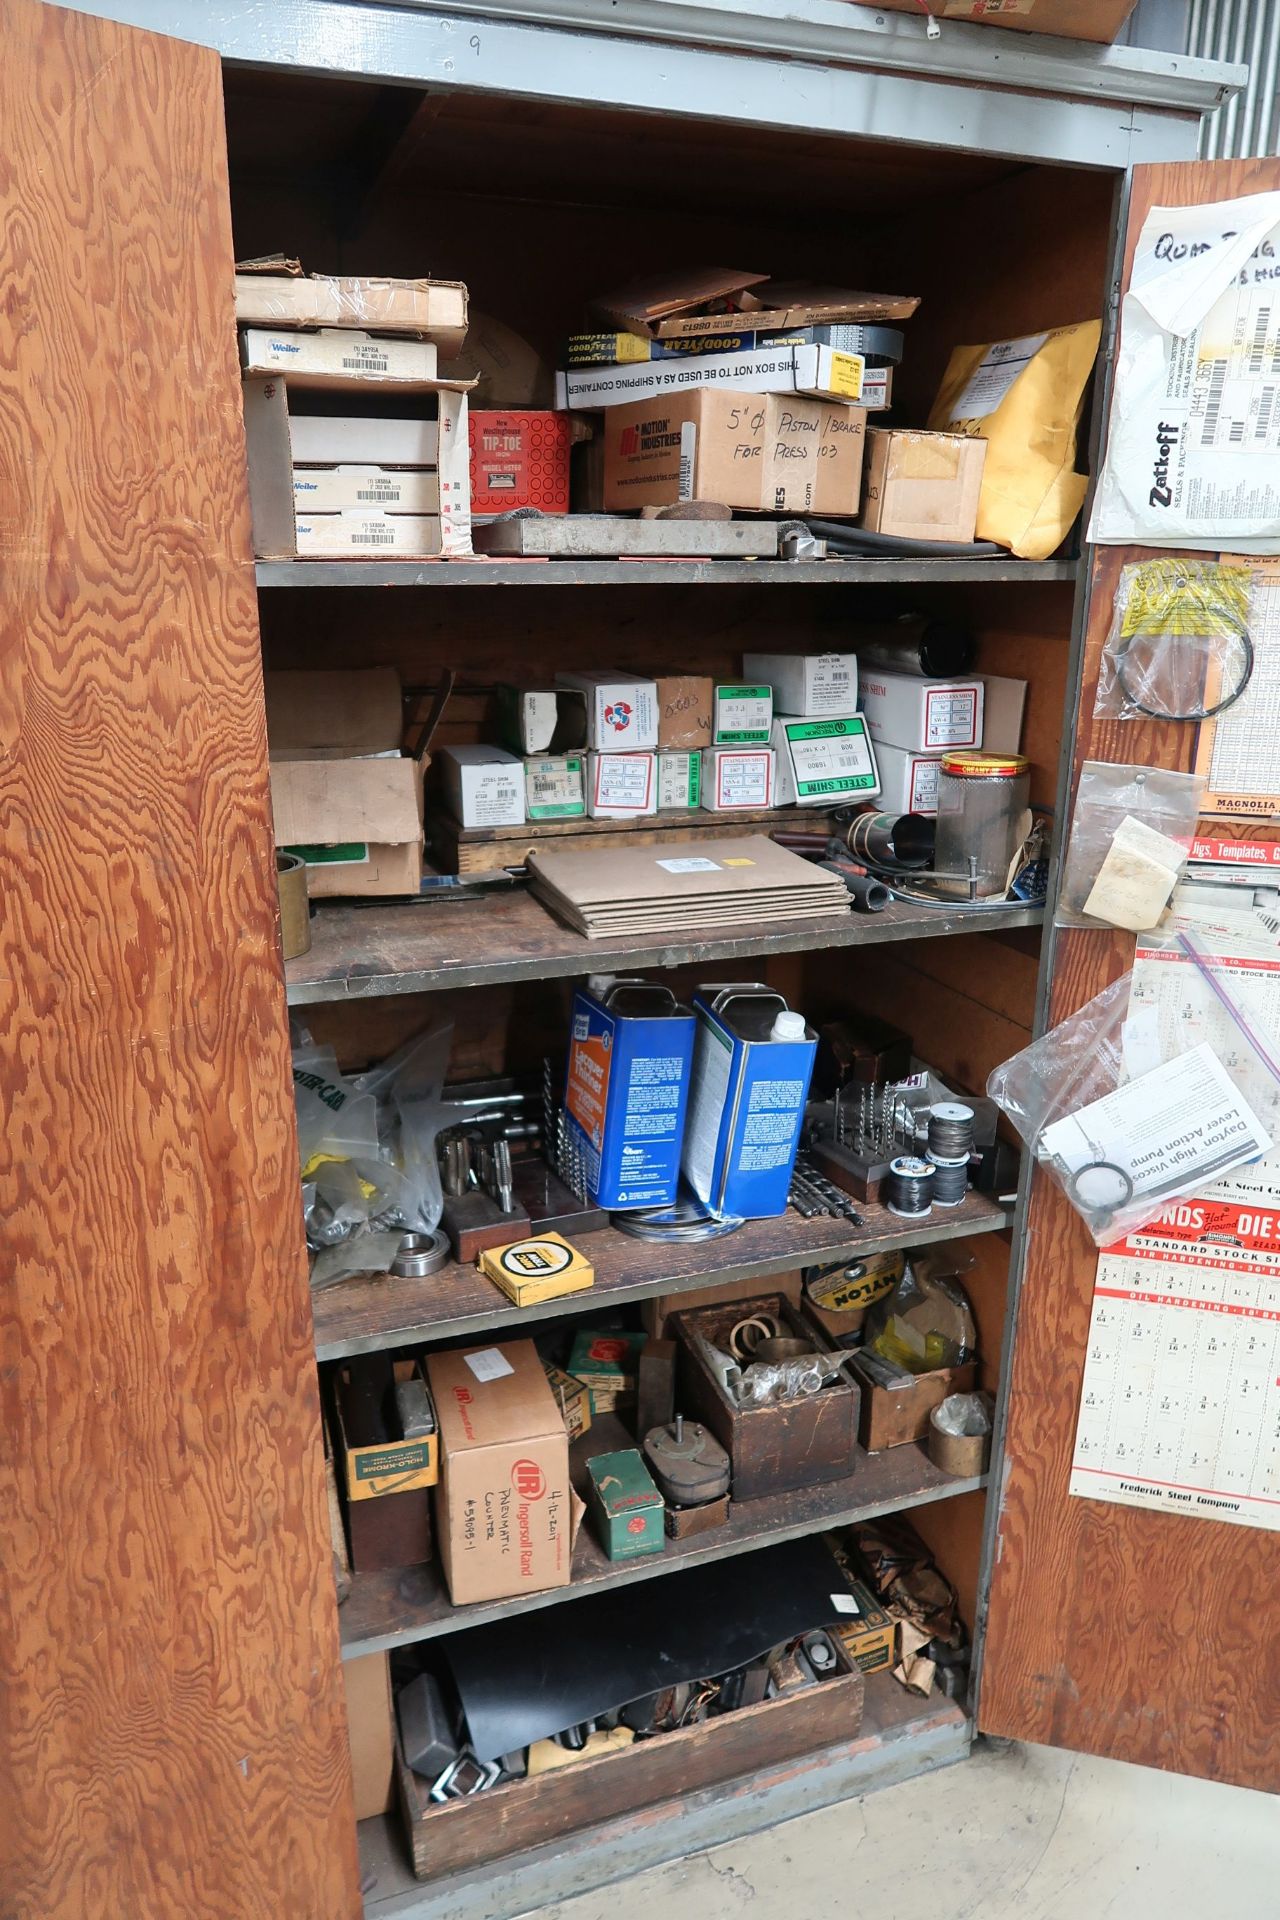 (LOT) CONTENETS OF WOOD CABINET INCLUDING SHIMS, BELTS, DRILLS, WIRE BRUSH WHEELS, HARDWARE